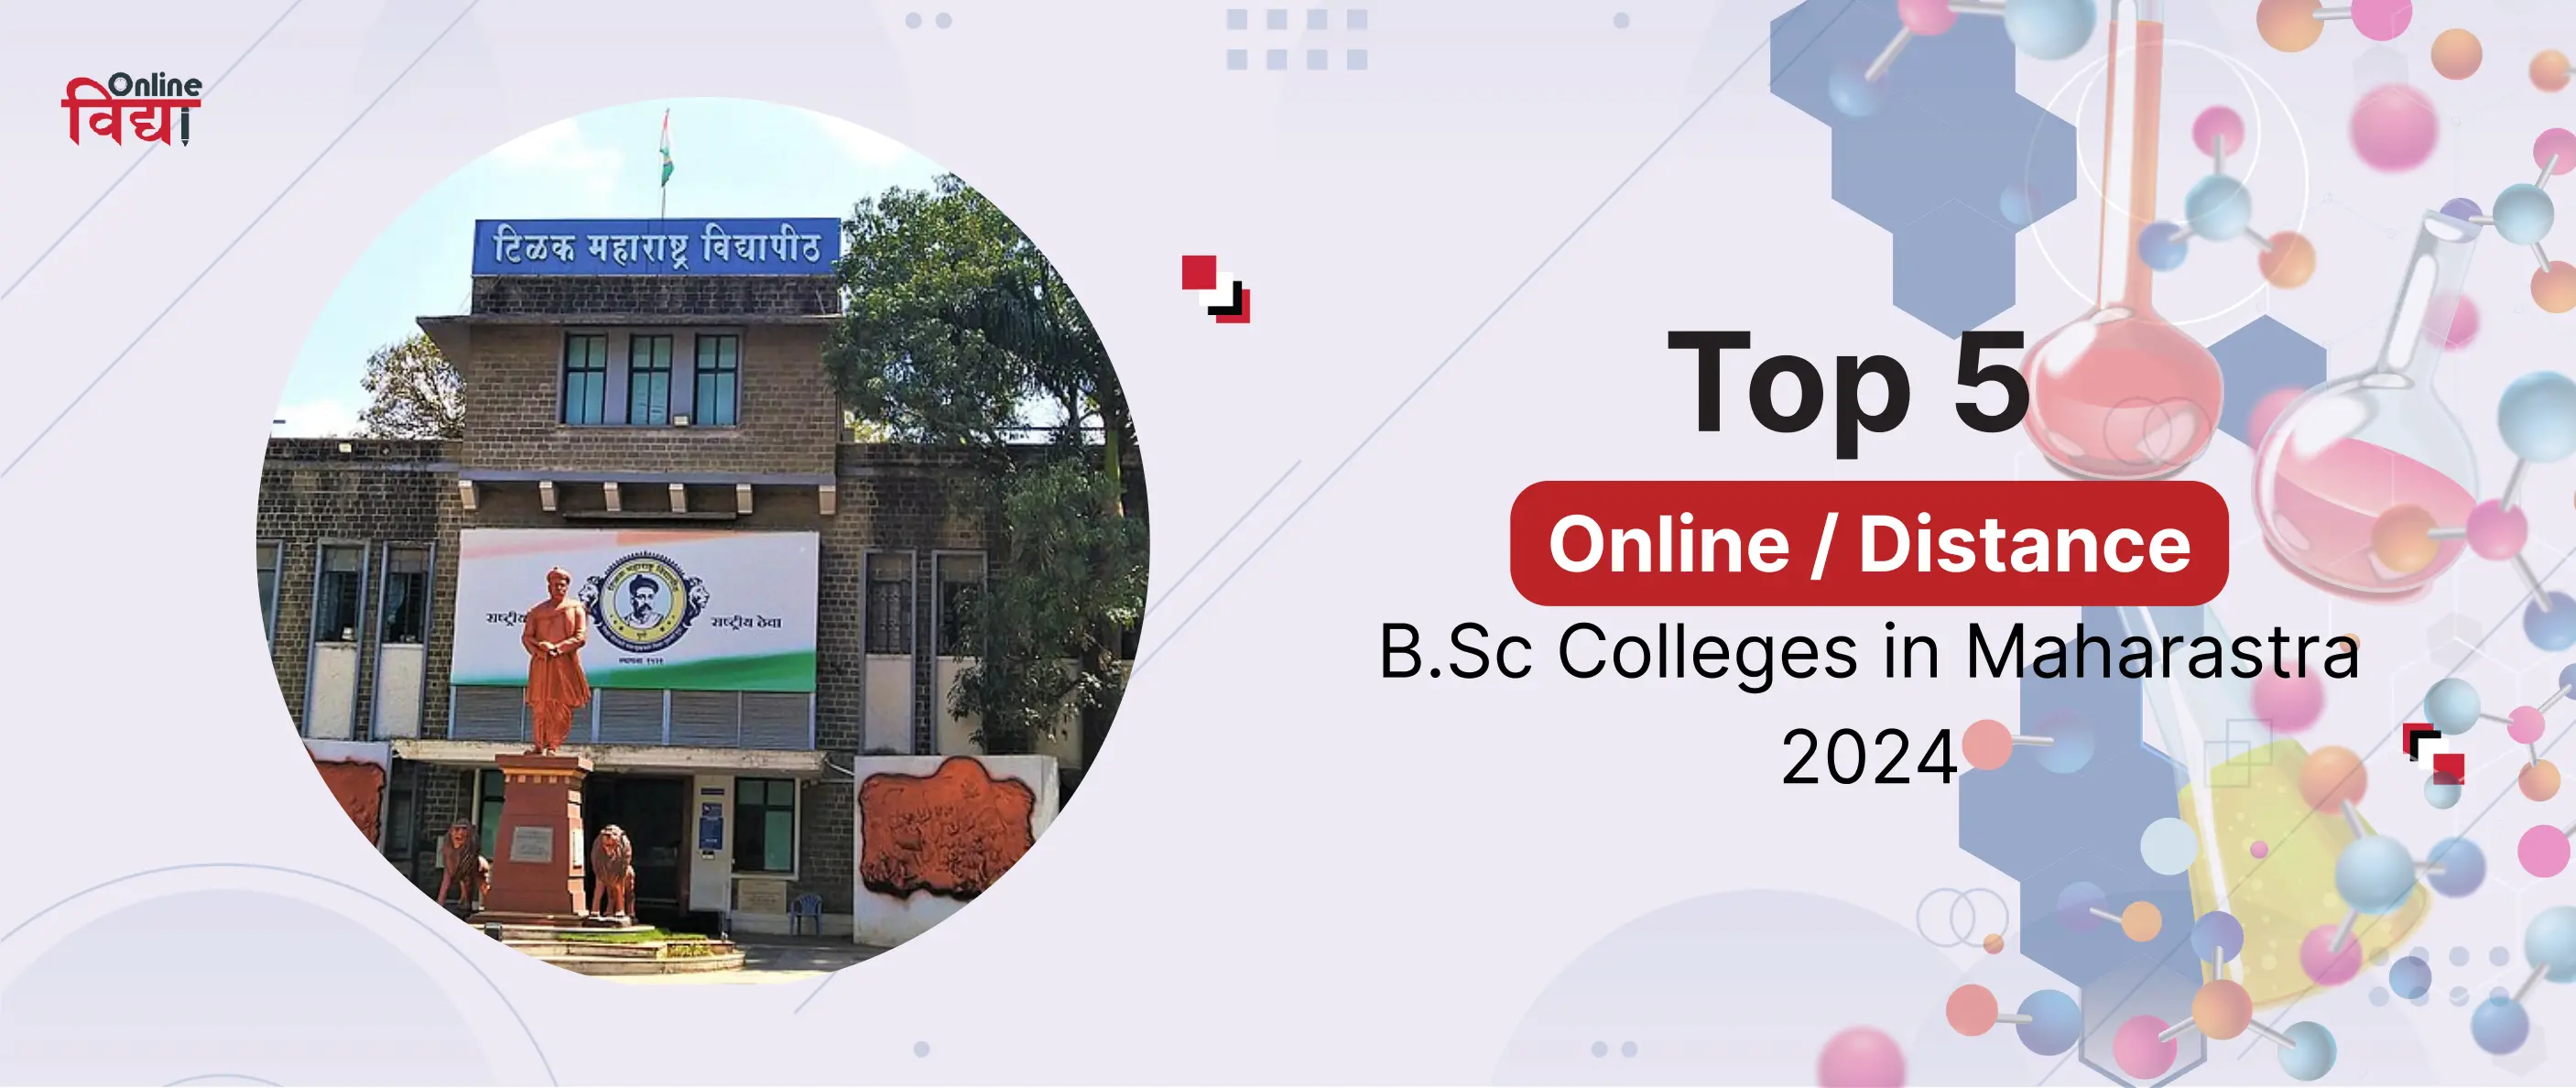 Top 5 Online/ Distance B.Sc Colleges in Maharashtra 2024